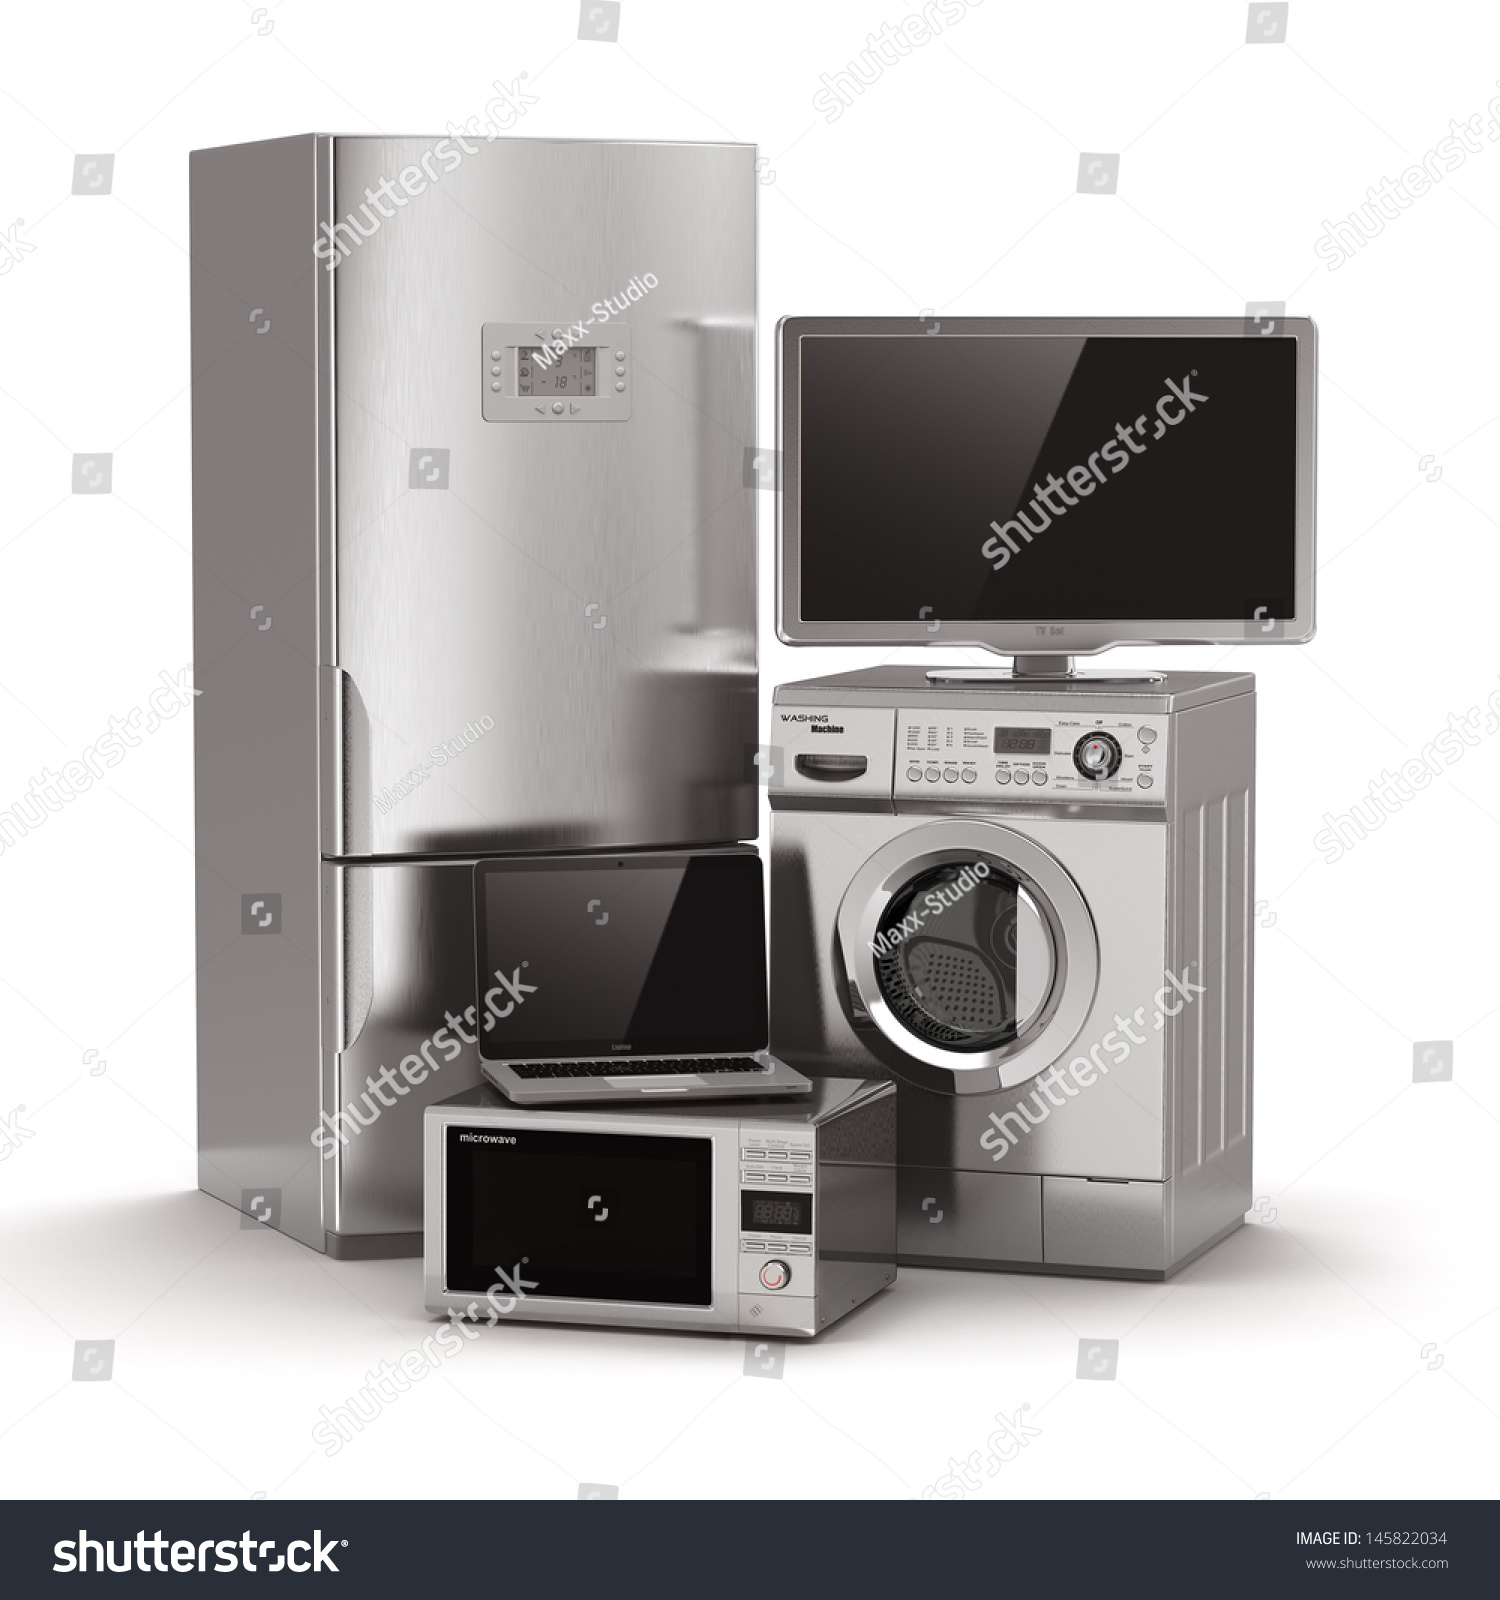 Home Appliances. Tv, Refrigerator, Microwave, Laptop And Washing ...